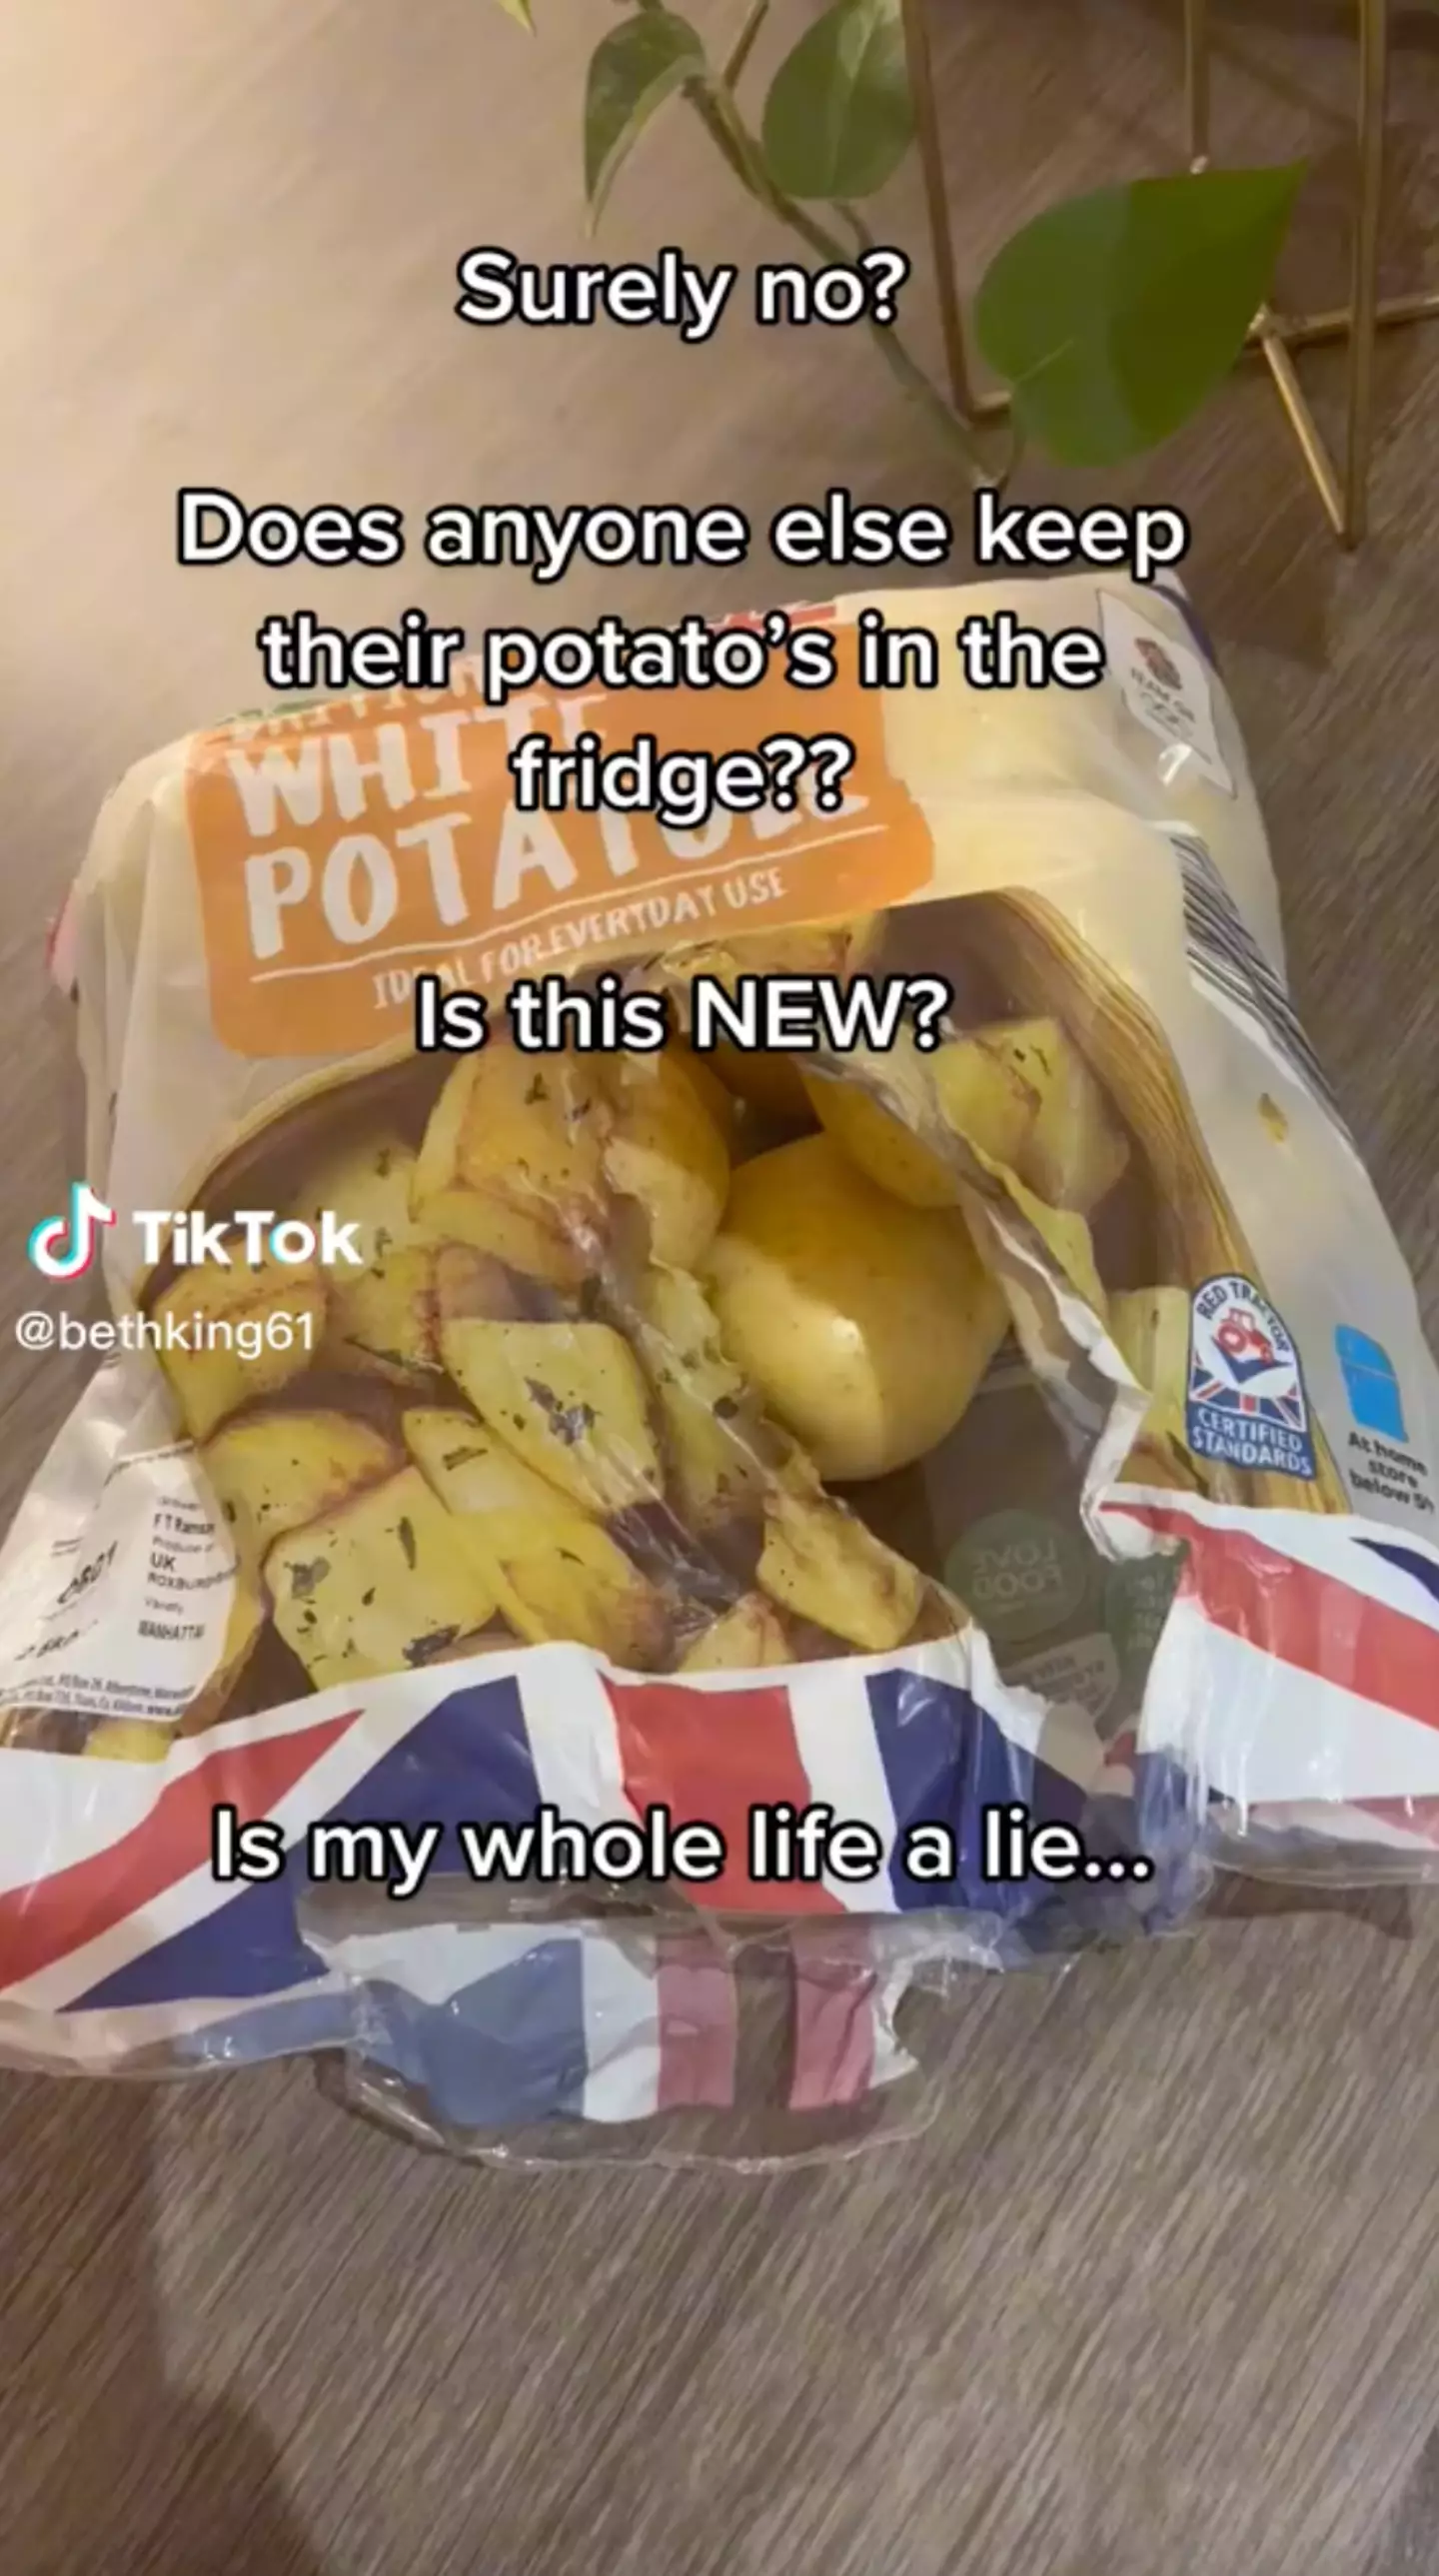 One woman sparked quite the debate online over how to properly store your potatoes.